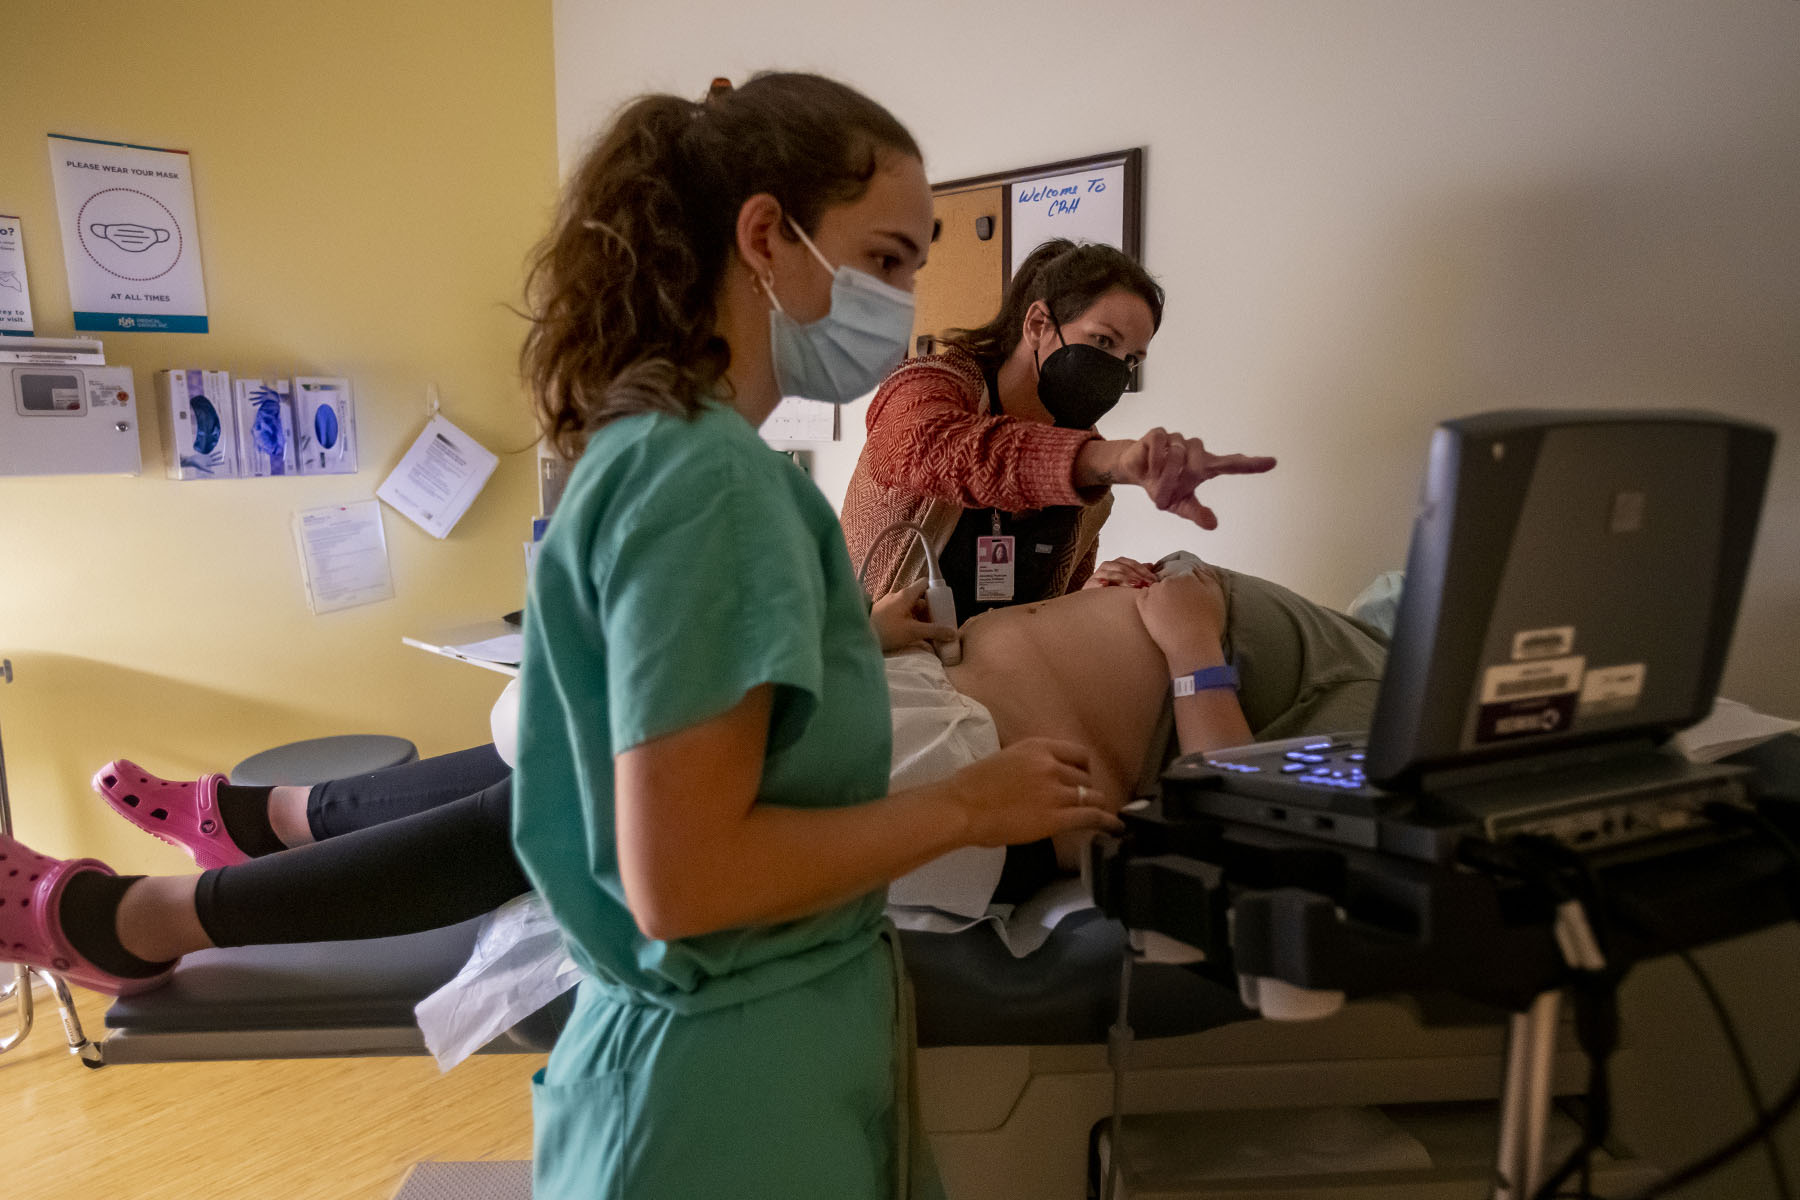 A family physician and her resident perform an ultrasound on a young woman in an examination room.